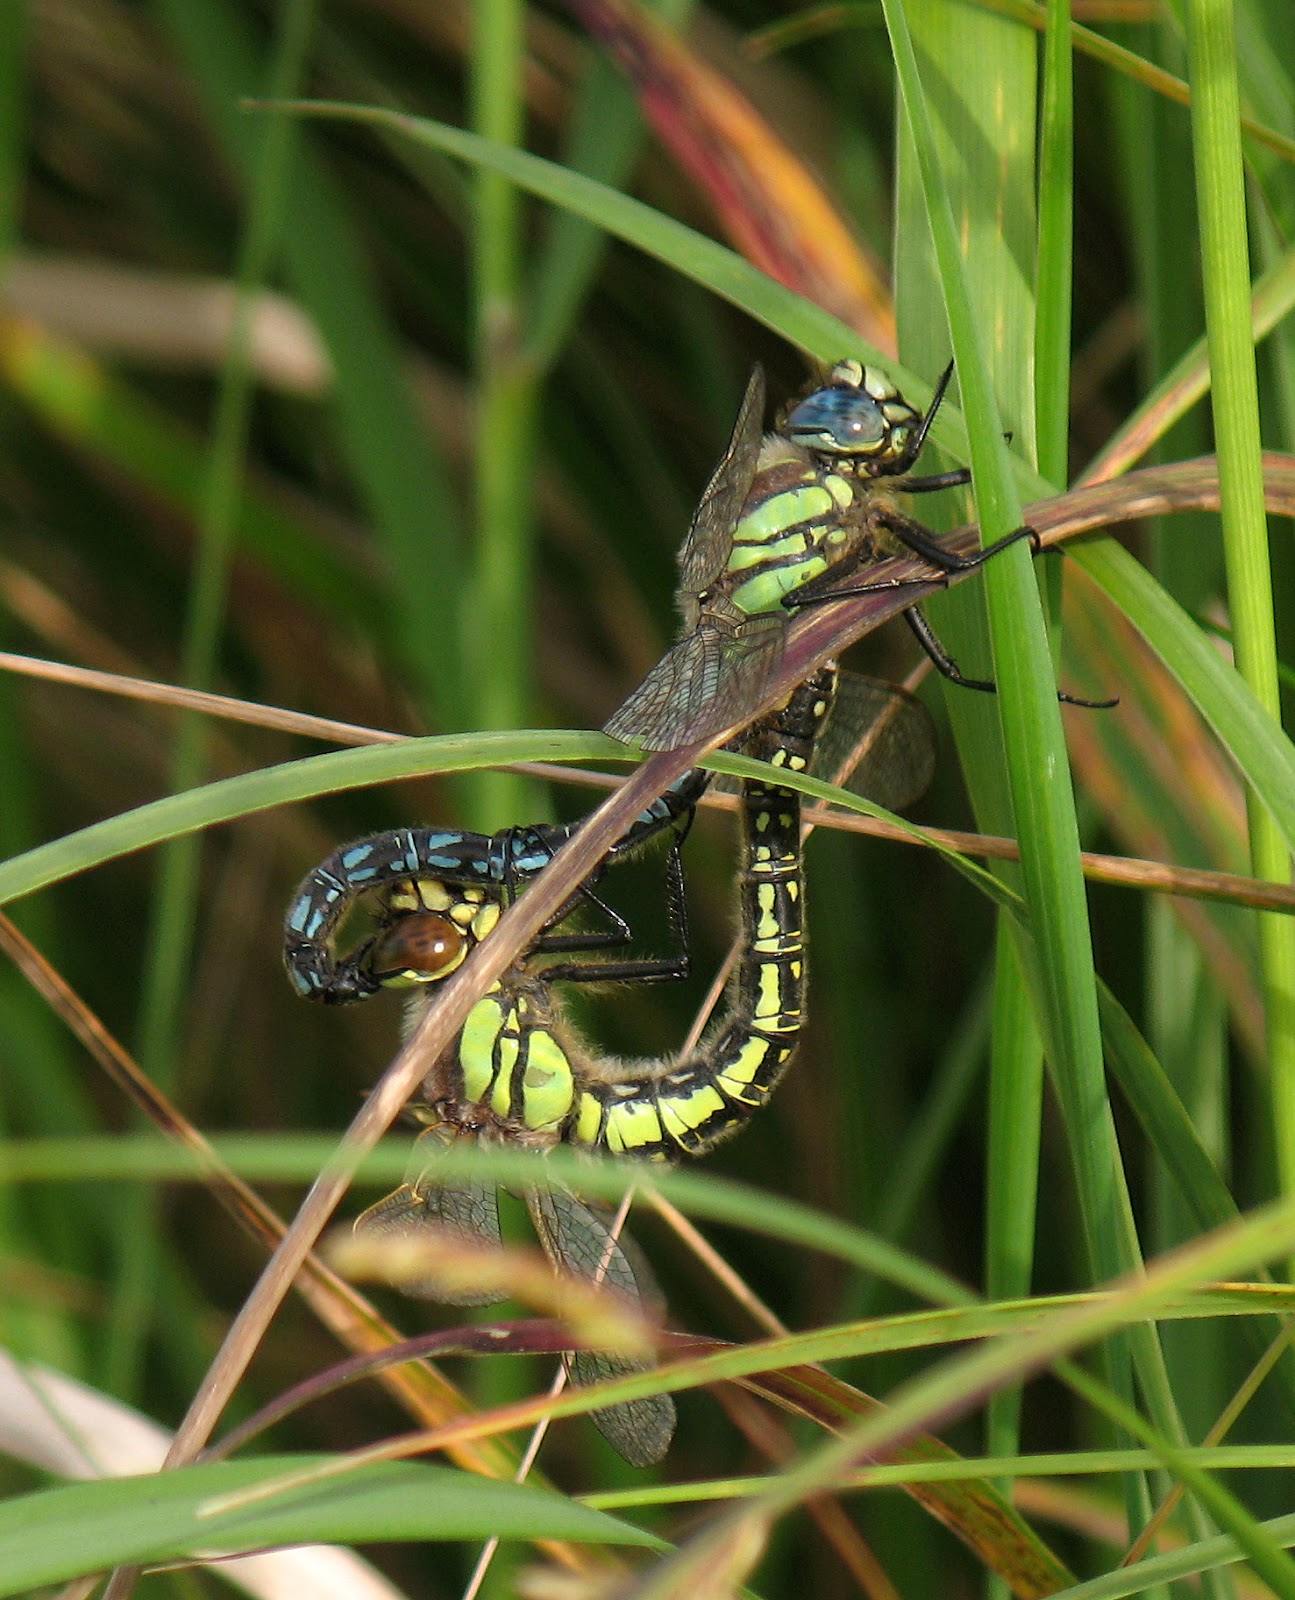 Hedgeland Tales: A couple more Dragonflies